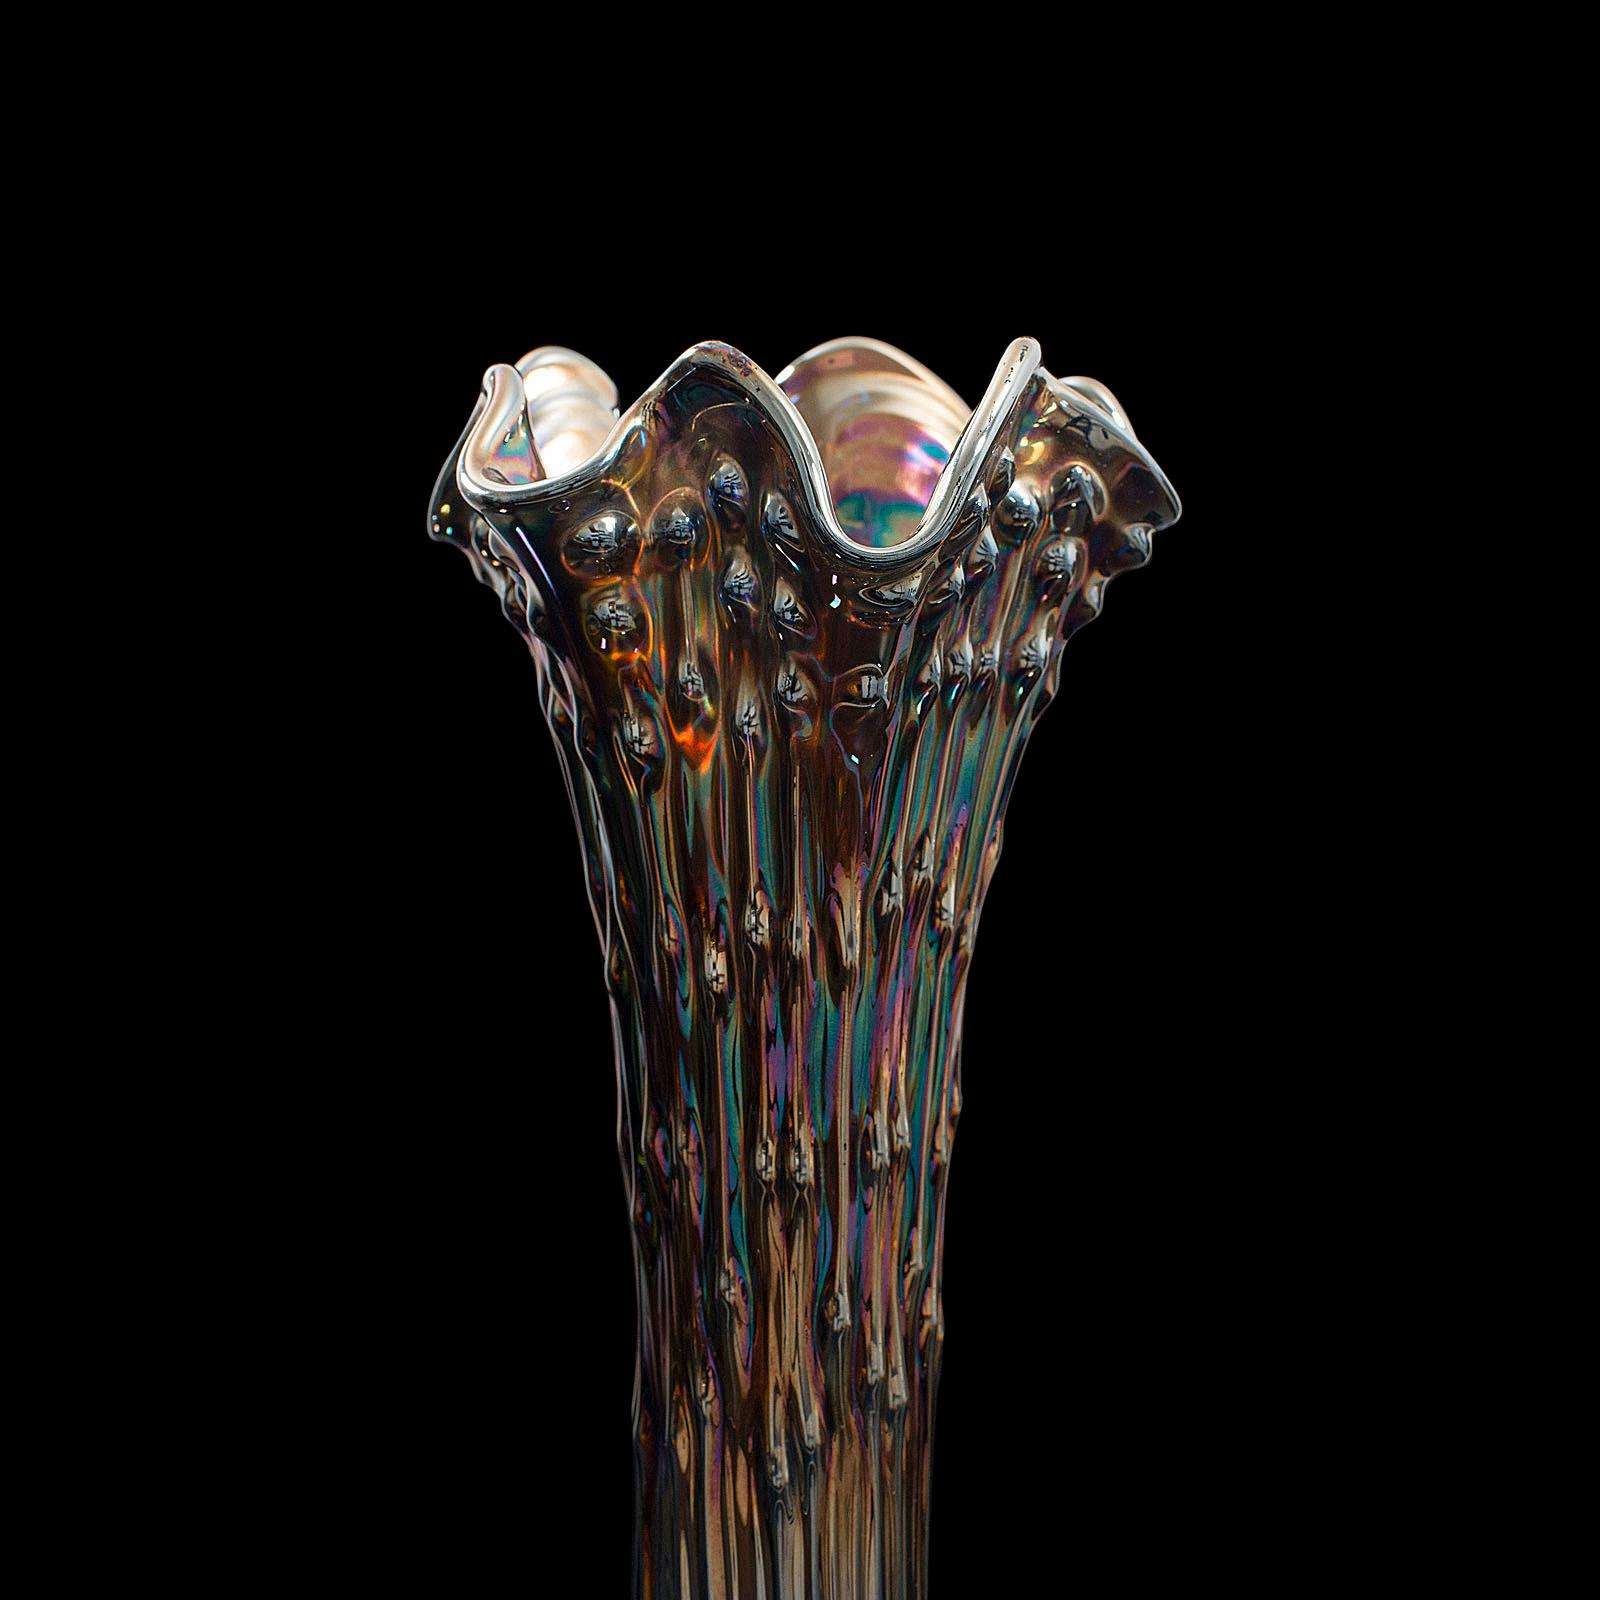 Tall Vintage Decorative Carnival Vase, English, Glass, Flower, Midcentury, 1950 For Sale 1